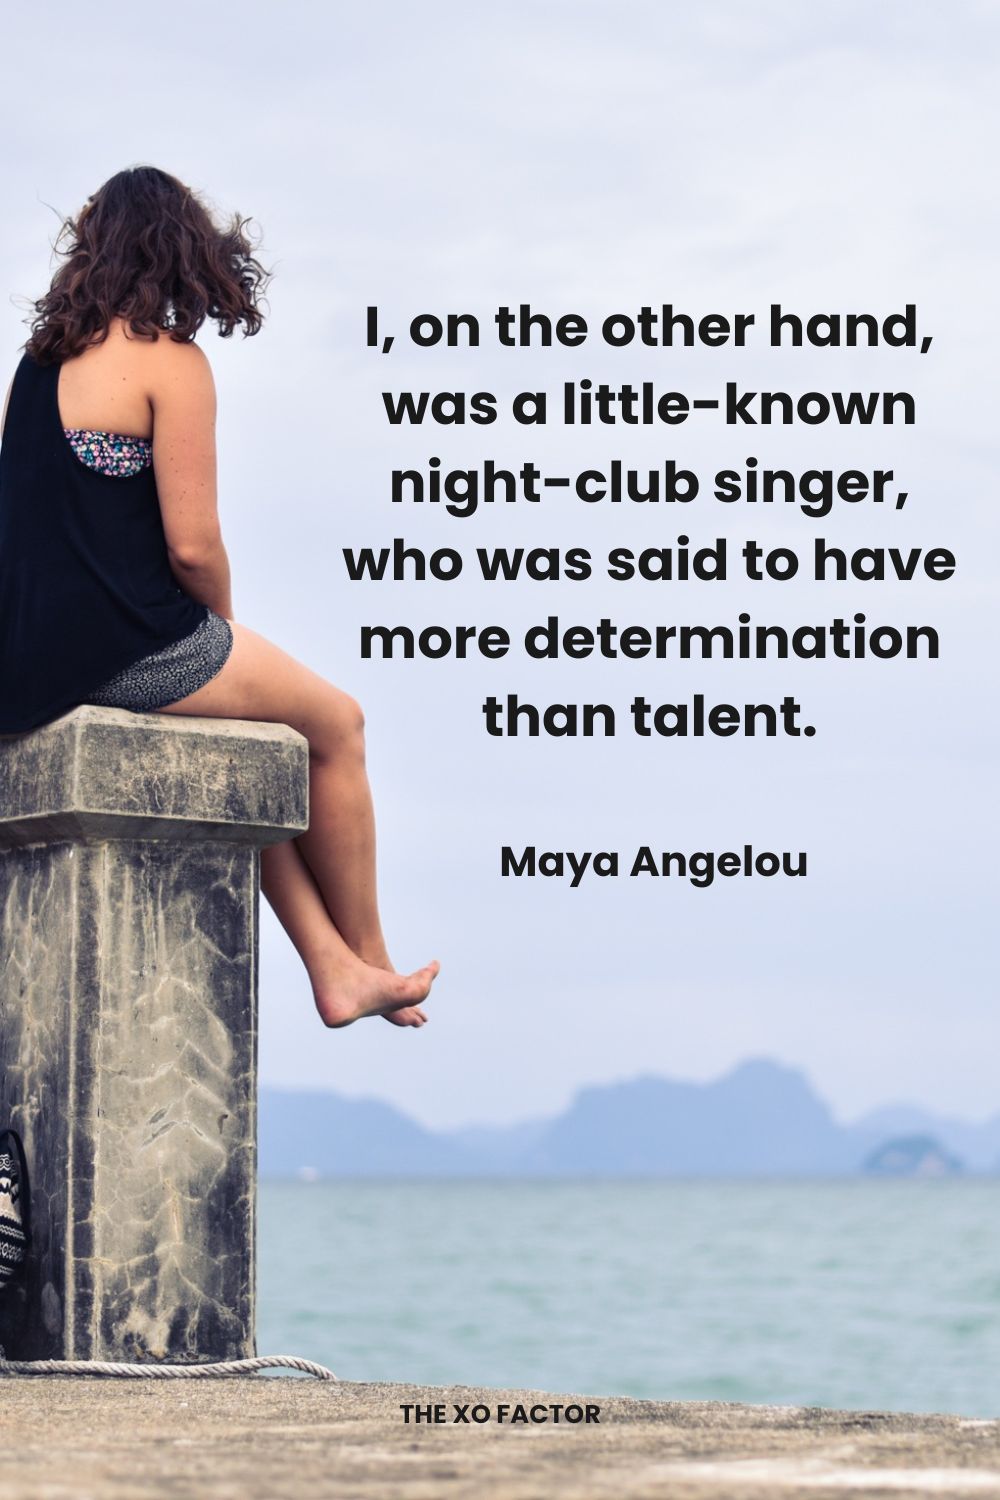 I, on the other hand, was a little-known night-club singer, who was said to have more determination than talent.  Maya Angelou